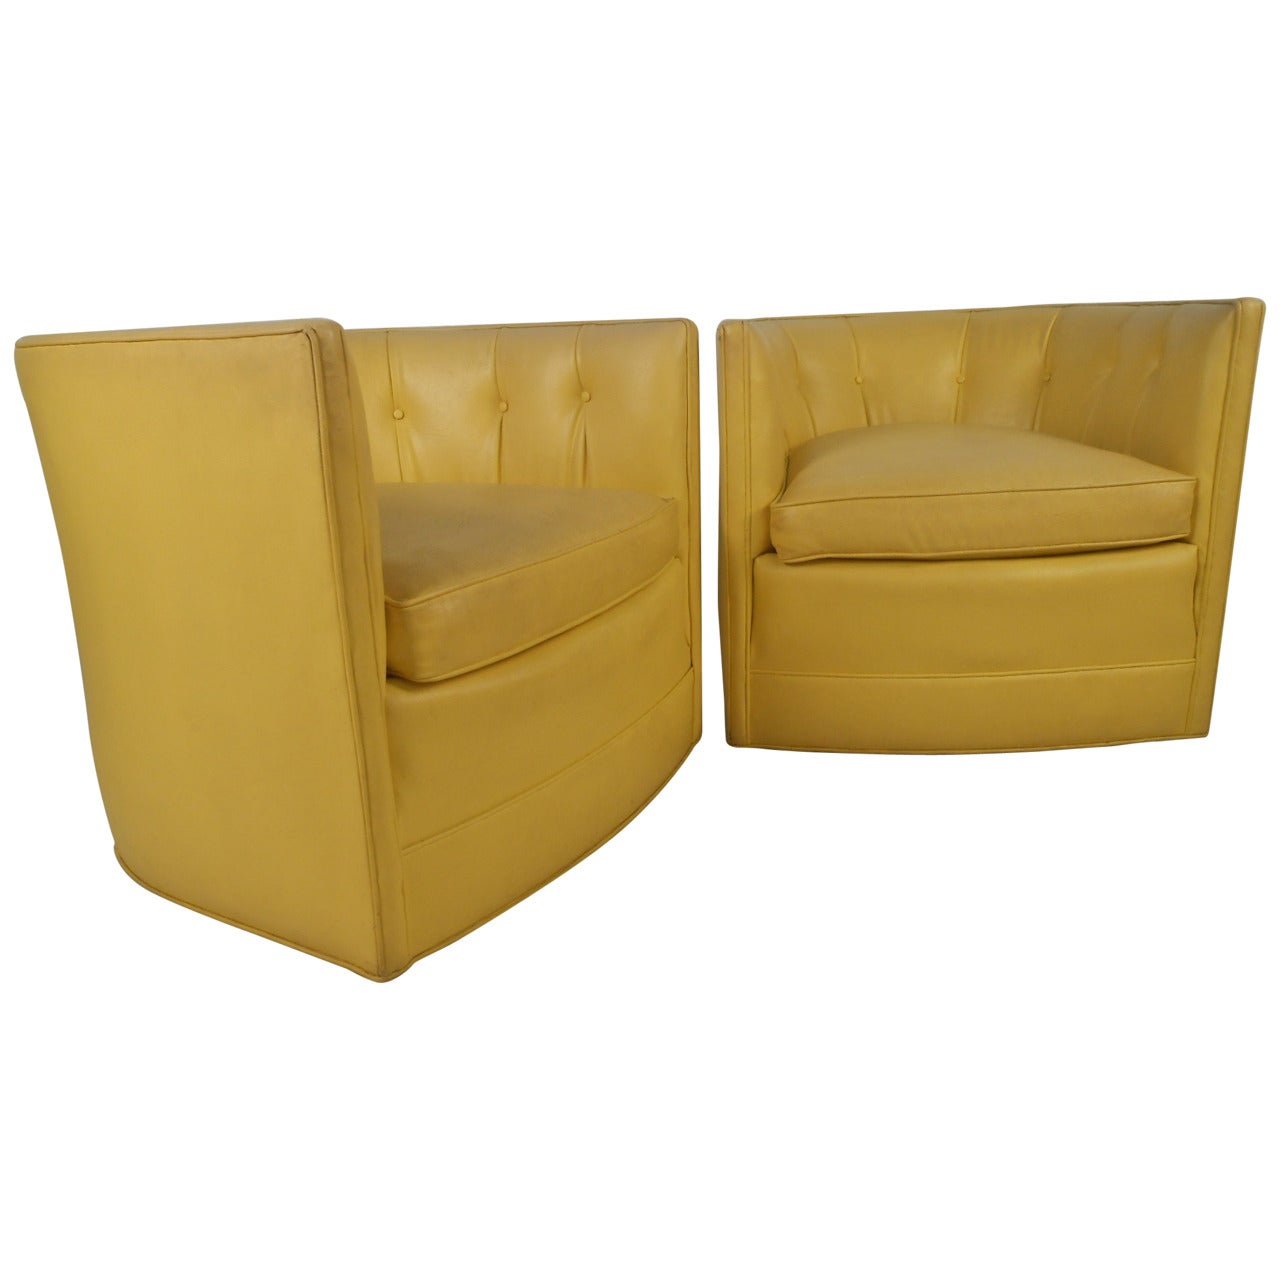 Pair of Yellow Mid-Century Modern Tub Chairs by Henredon